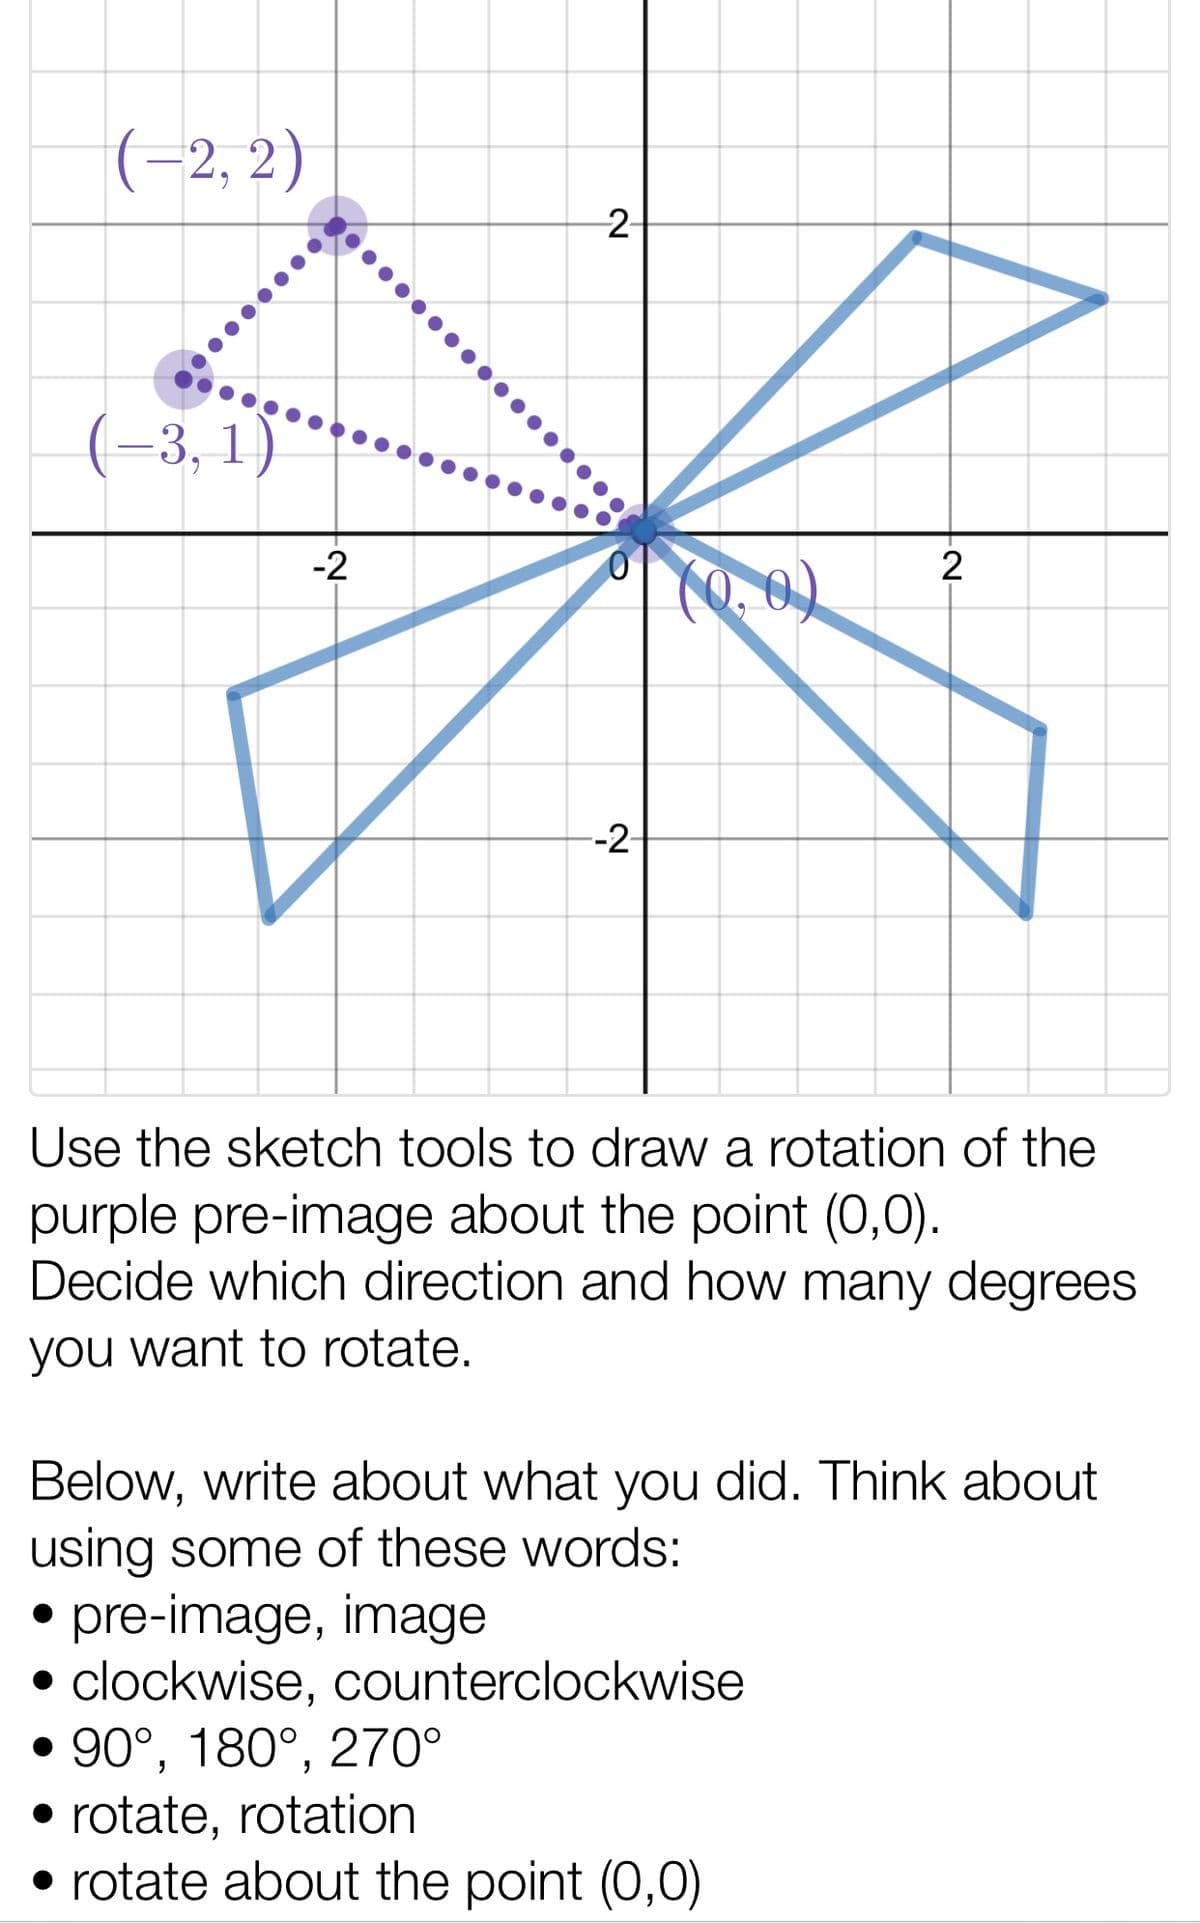 (-2, 2)
2-
(–3, 1)
-2
2
--2-
Use the sketch tools to draw a rotation of the
purple pre-image about the point (0,0).
Decide which direction and how many degrees
you want to rotate.
Below, write about what you did. Think about
using some of these words:
• pre-image, image
• clockwise, counterclockwise
90°, 180°, 270°
• rotate, rotation
• rotate about the point (0,0)
